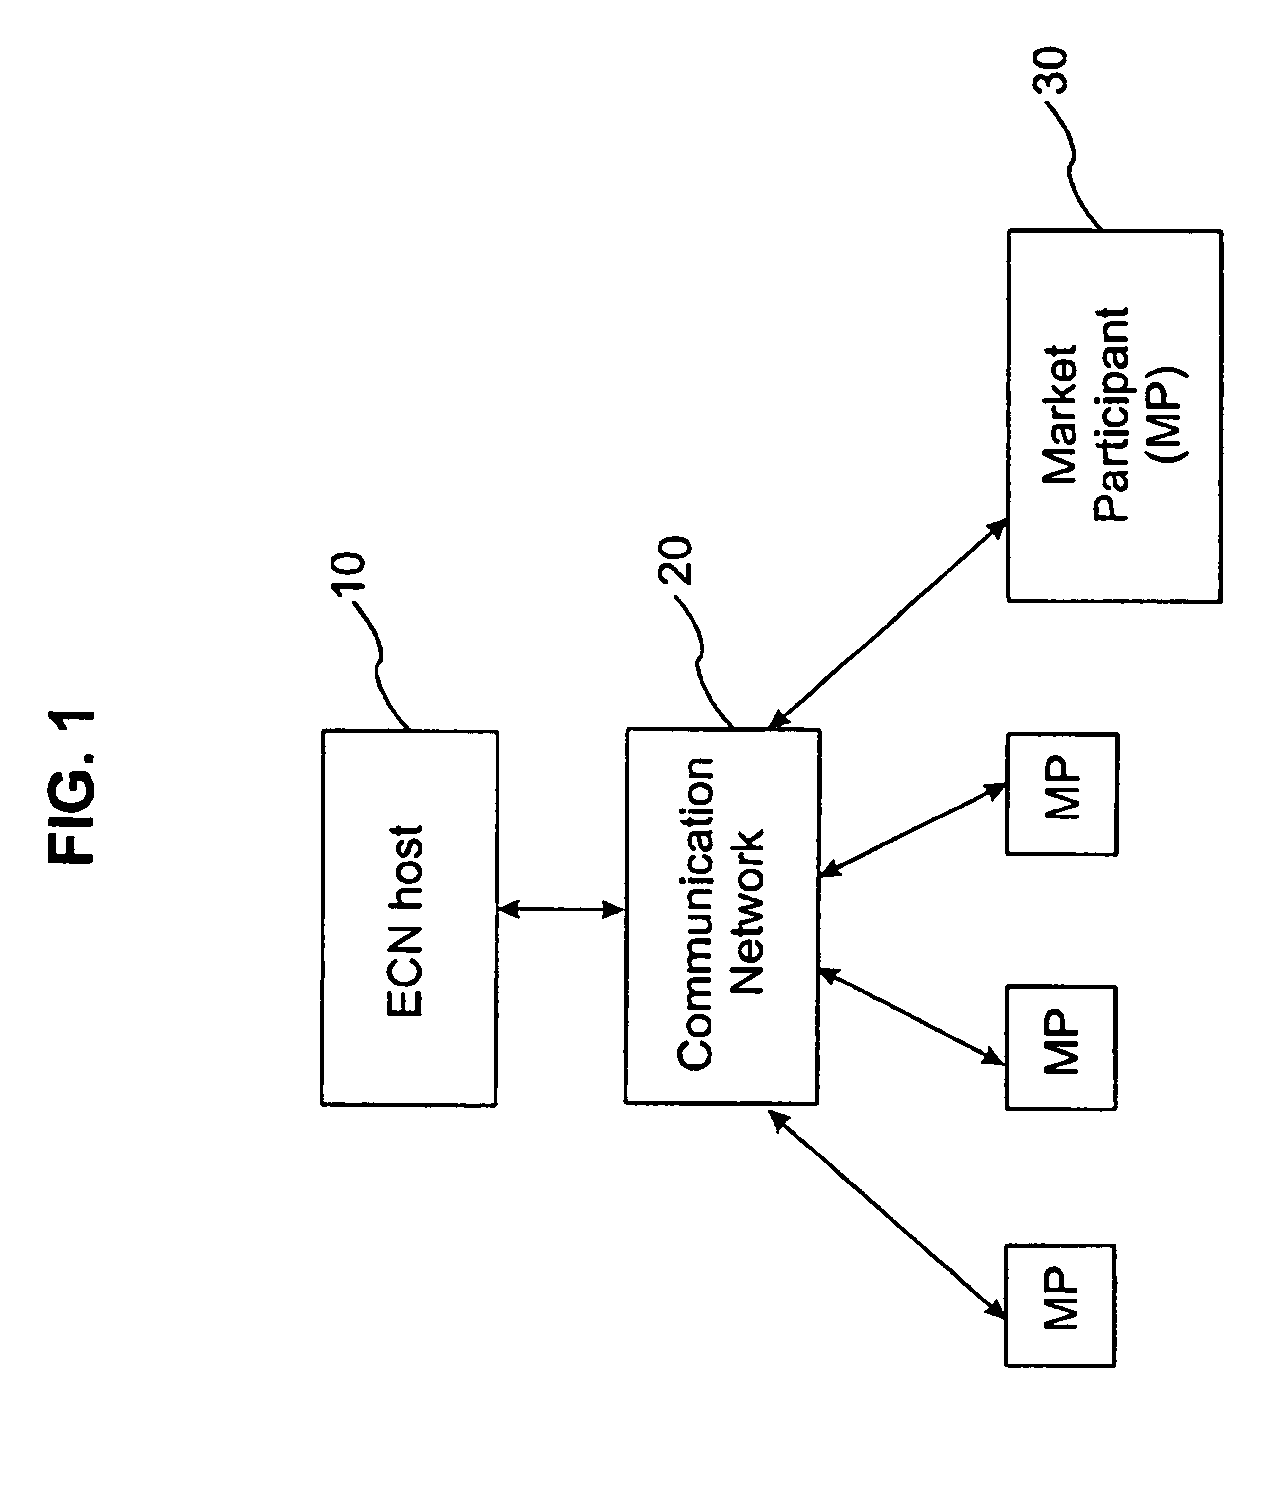 System and method for displaying market information